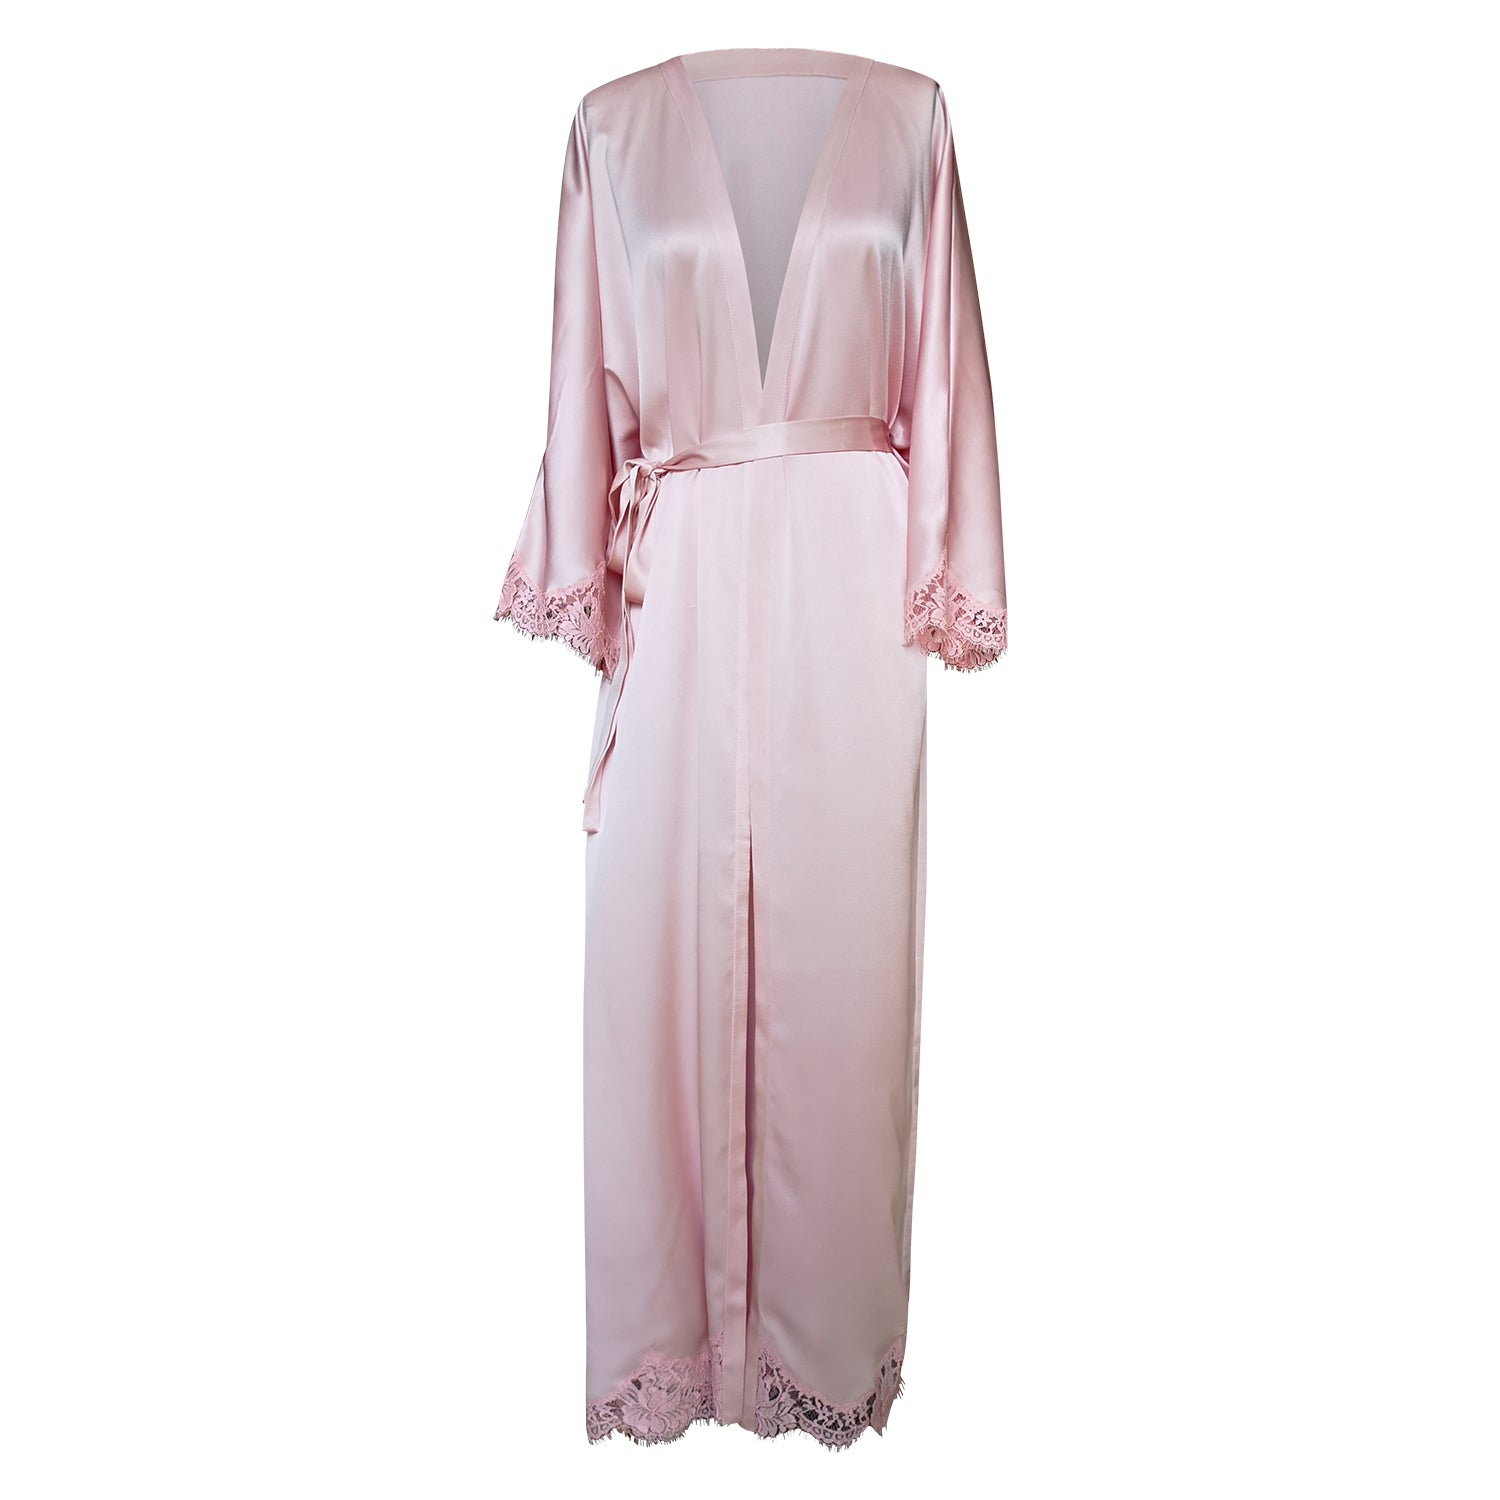 SILK ROBE IN PALE PINK WITH FRENCH LACE HEMS